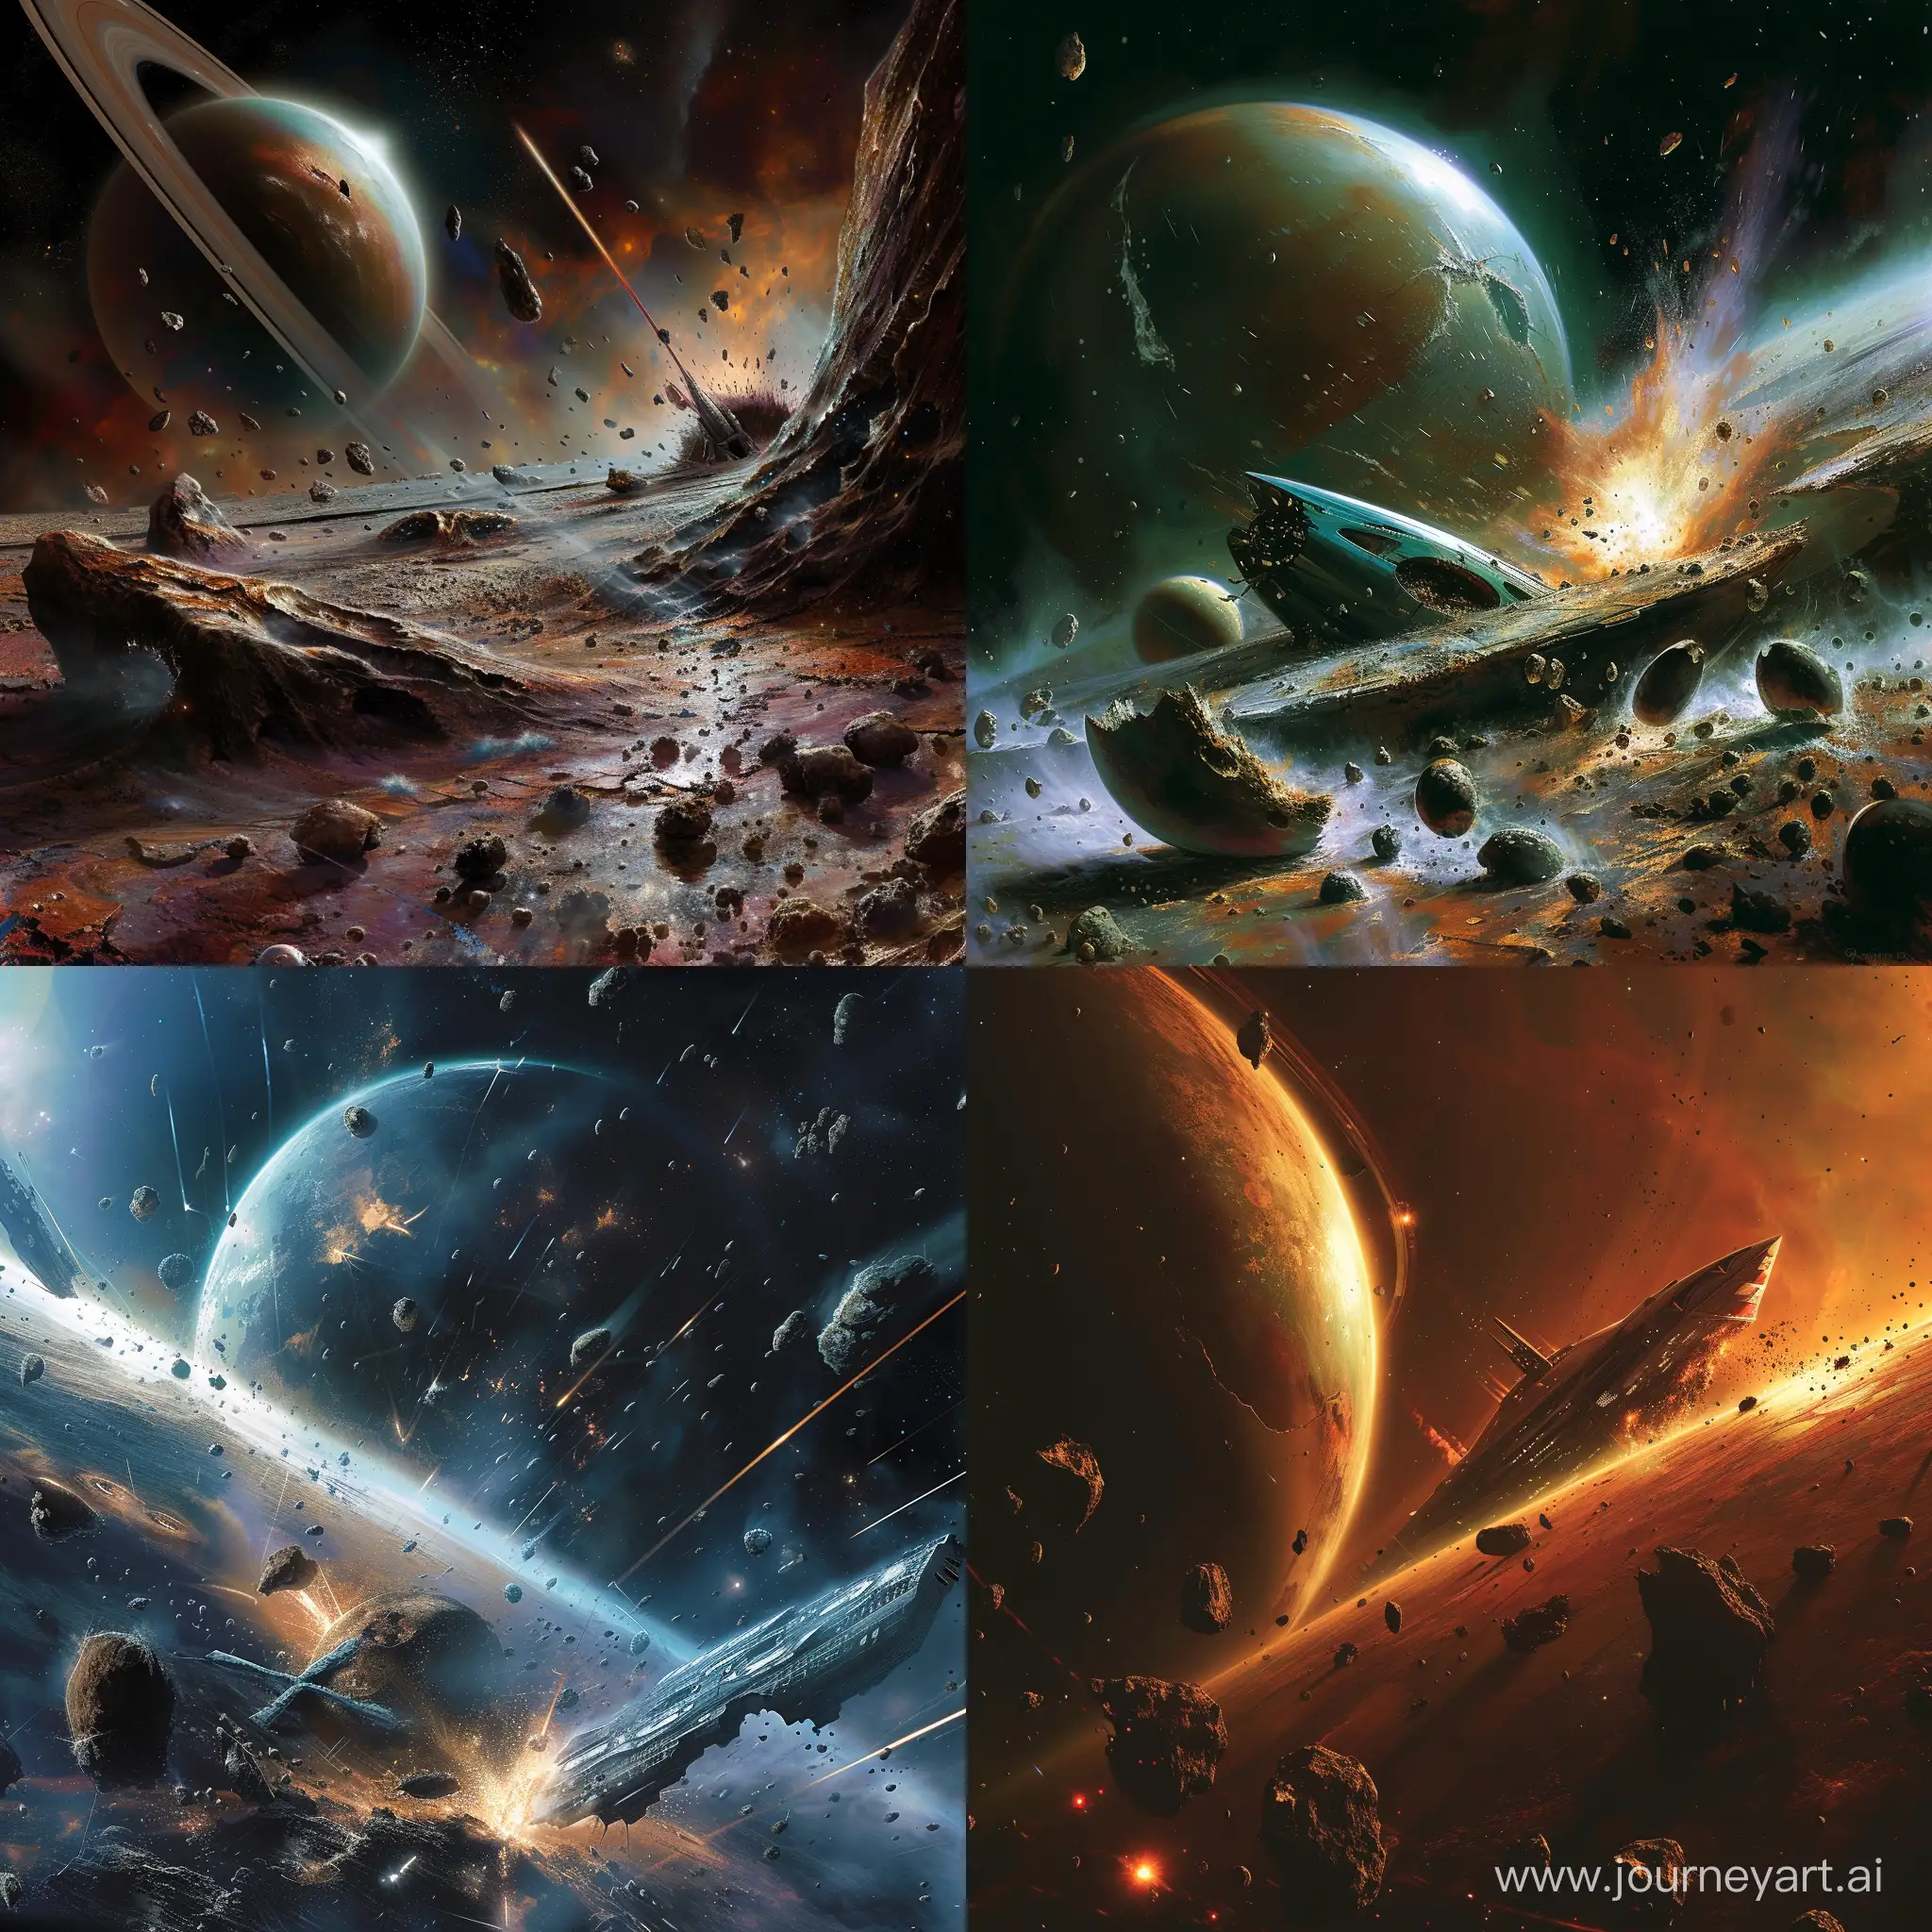 Epic-Space-Odyssey-Crashed-Planets-Quasar-and-Starship-Exploration